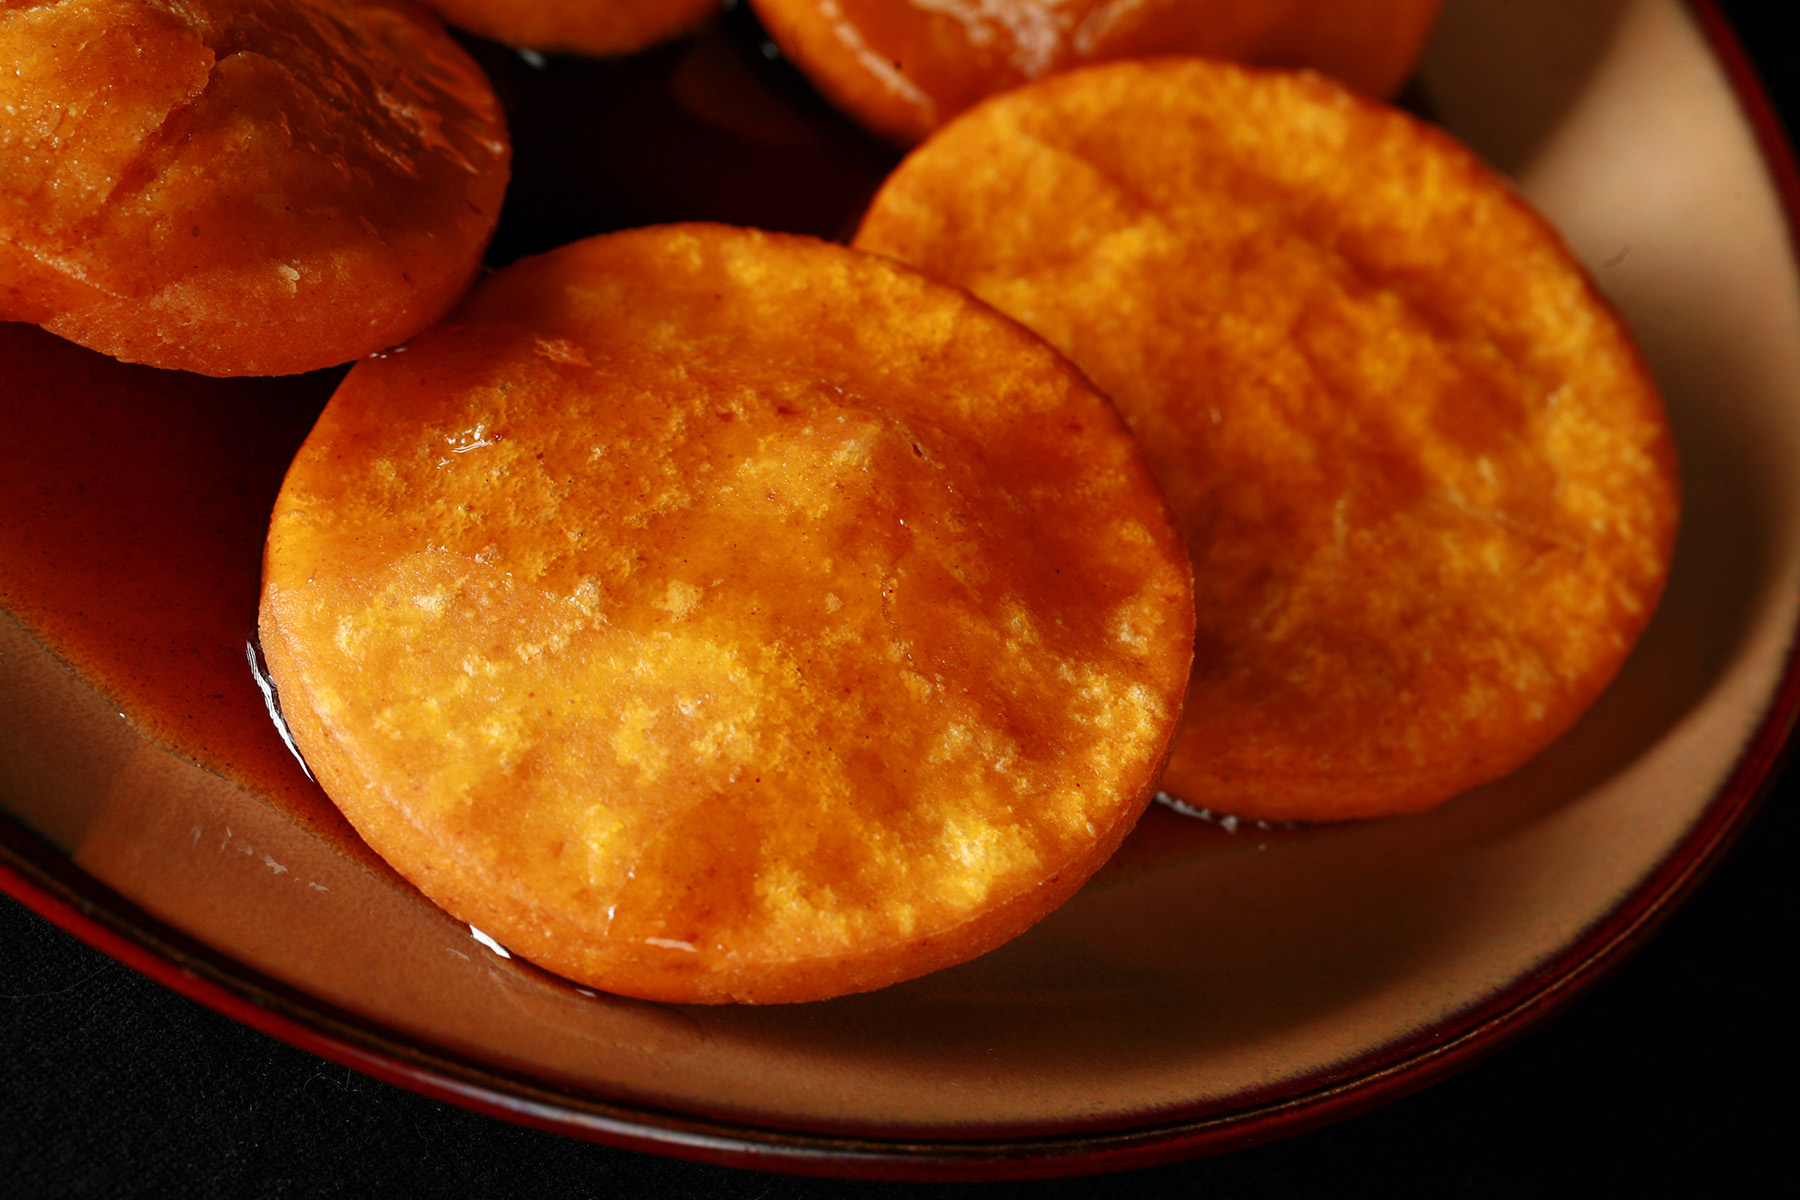 A plate of gluten free sopaipilla pasadas, with sauce drizzled over them.